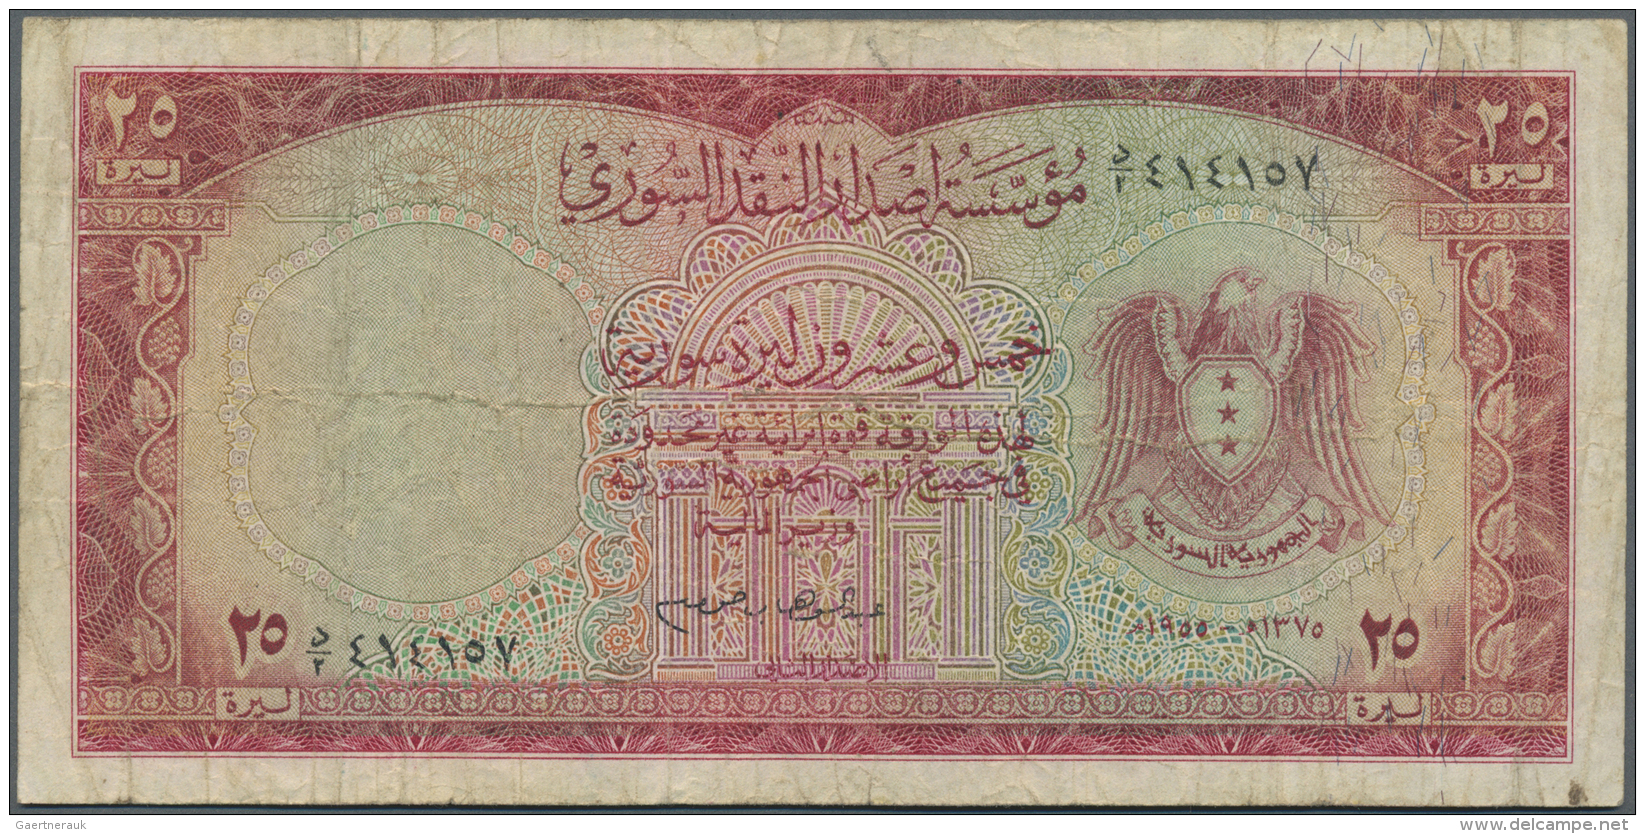 Syria / Syrien: 25 Livres ND(1955) P. 78B, Stronger Used With Several Folds And Creases, Stained Paper, 2 Small Pinholes - Syrie